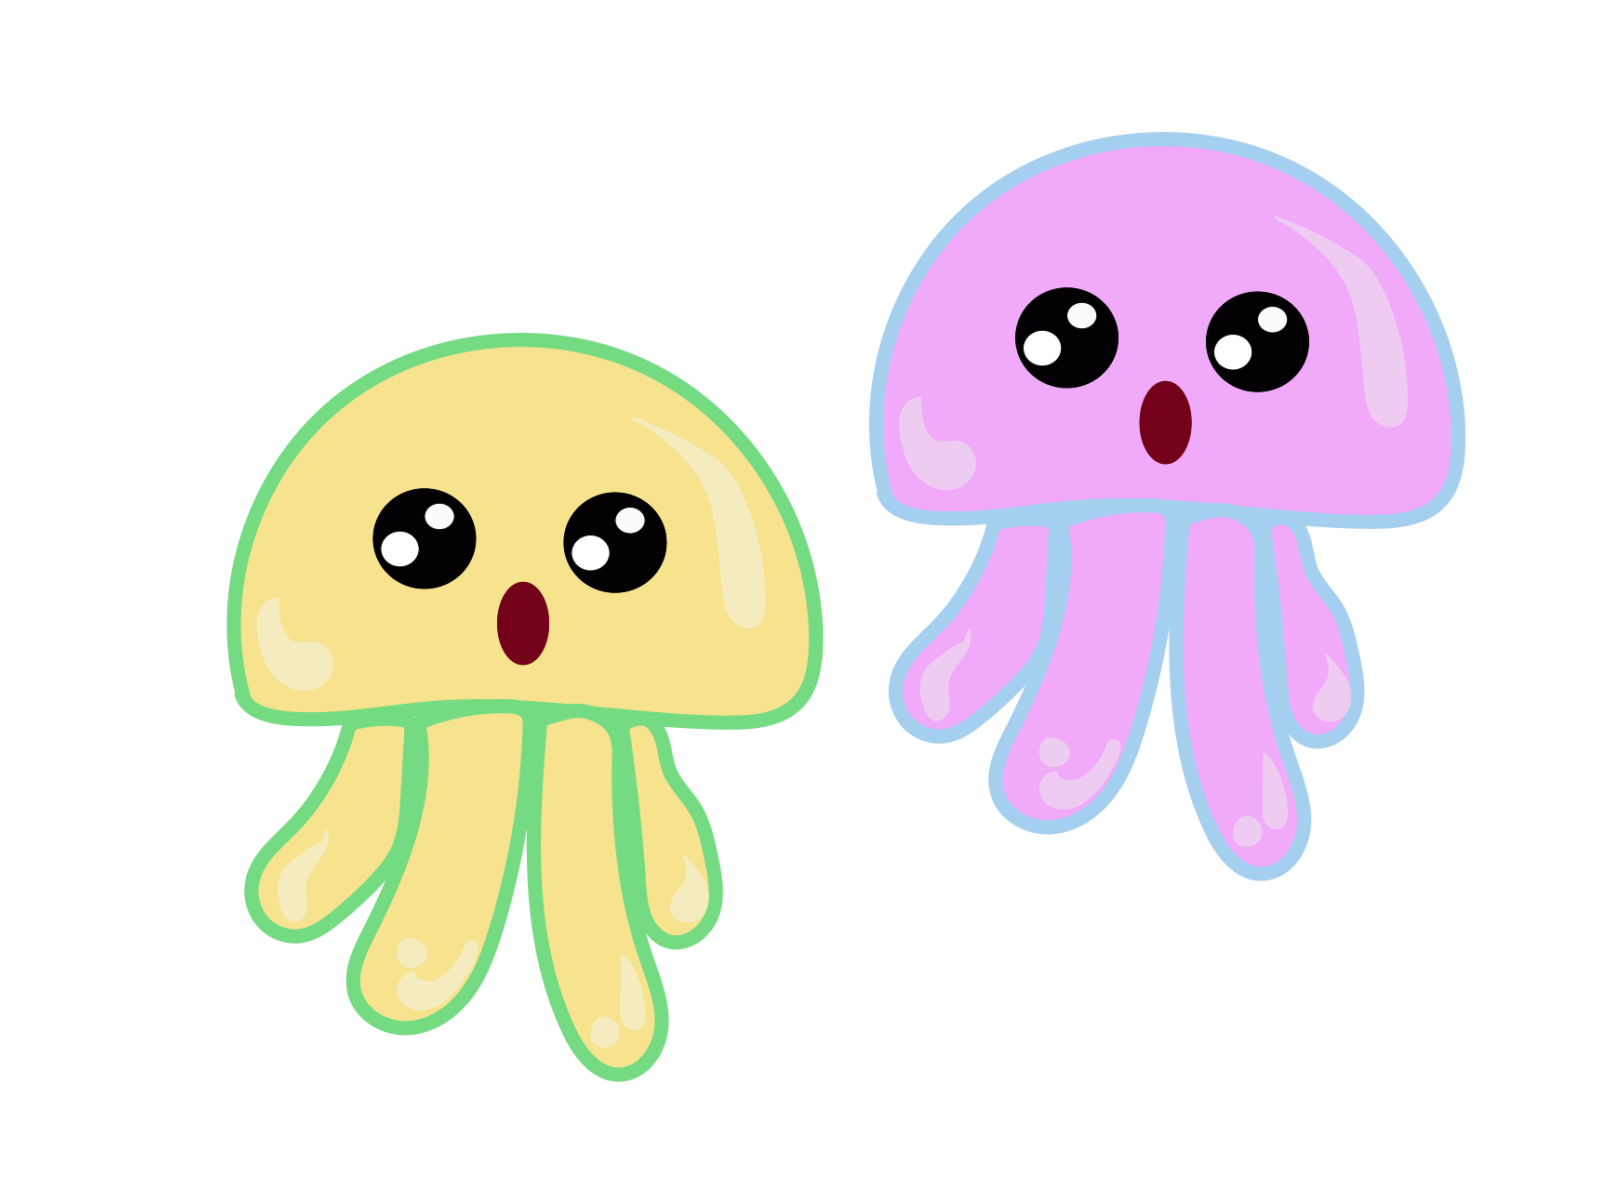 how to draw a cute jellyfish